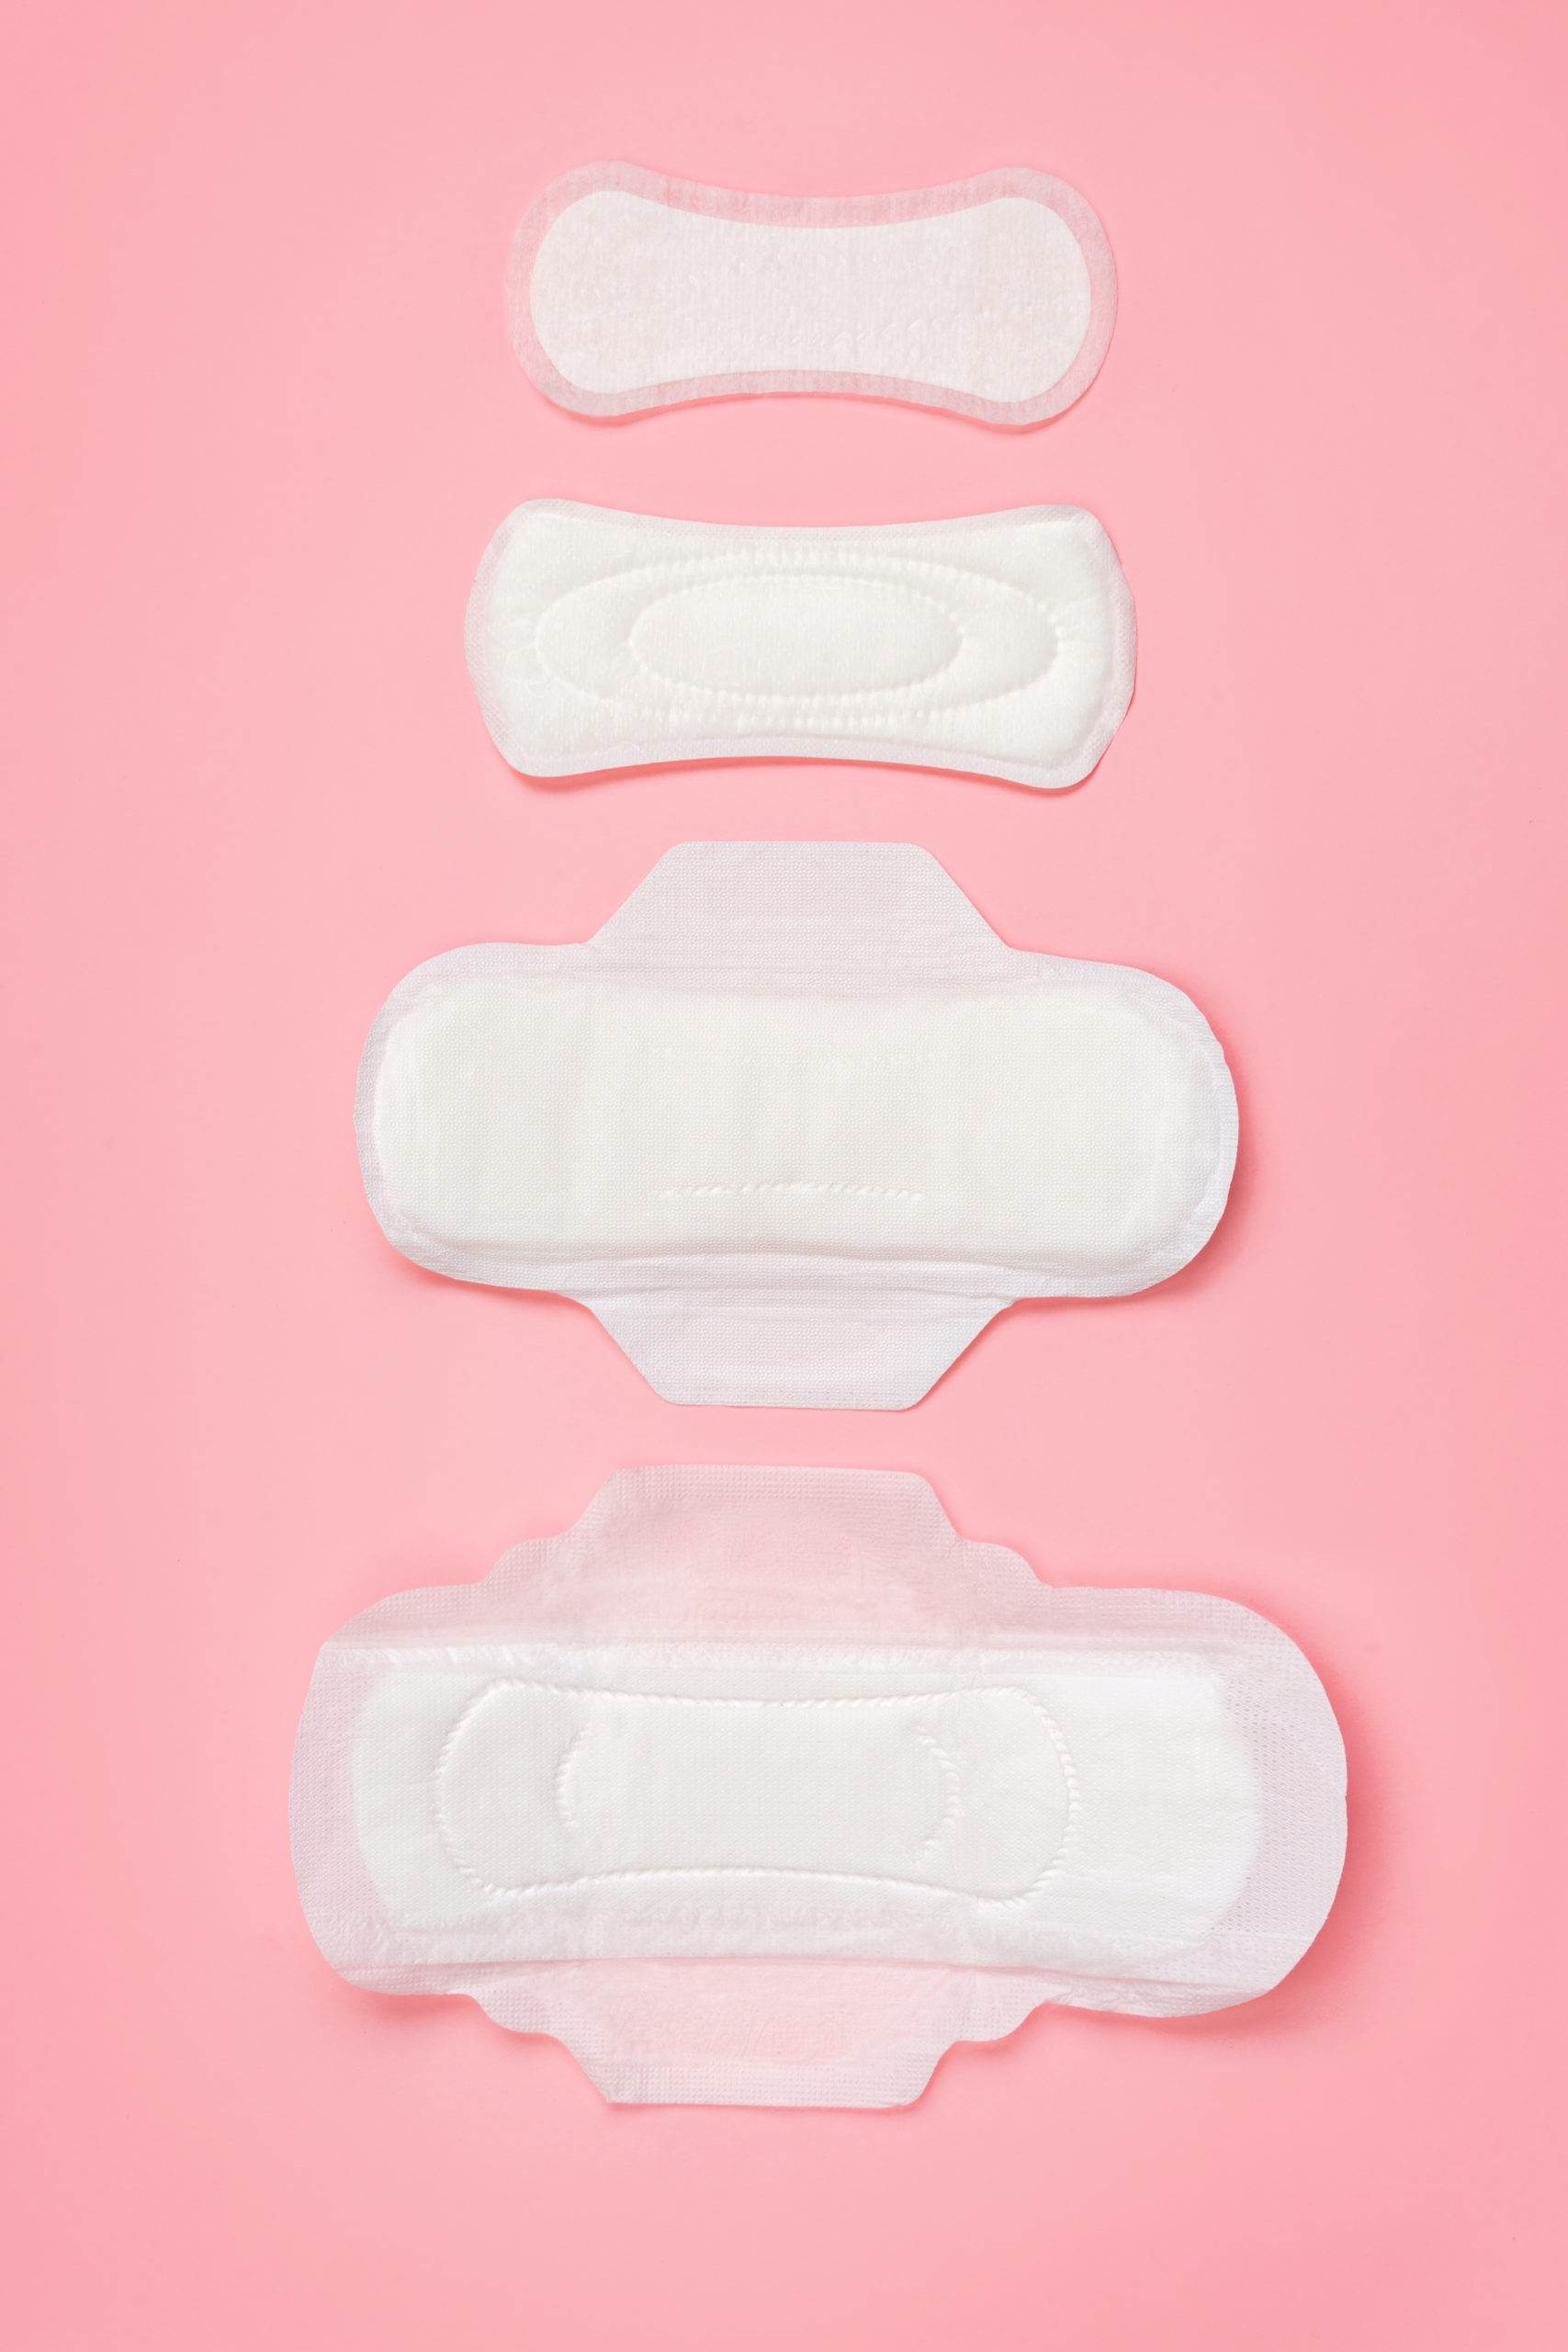 Set of different sanitary napkins on pink background. Concept of critical days, menstruation